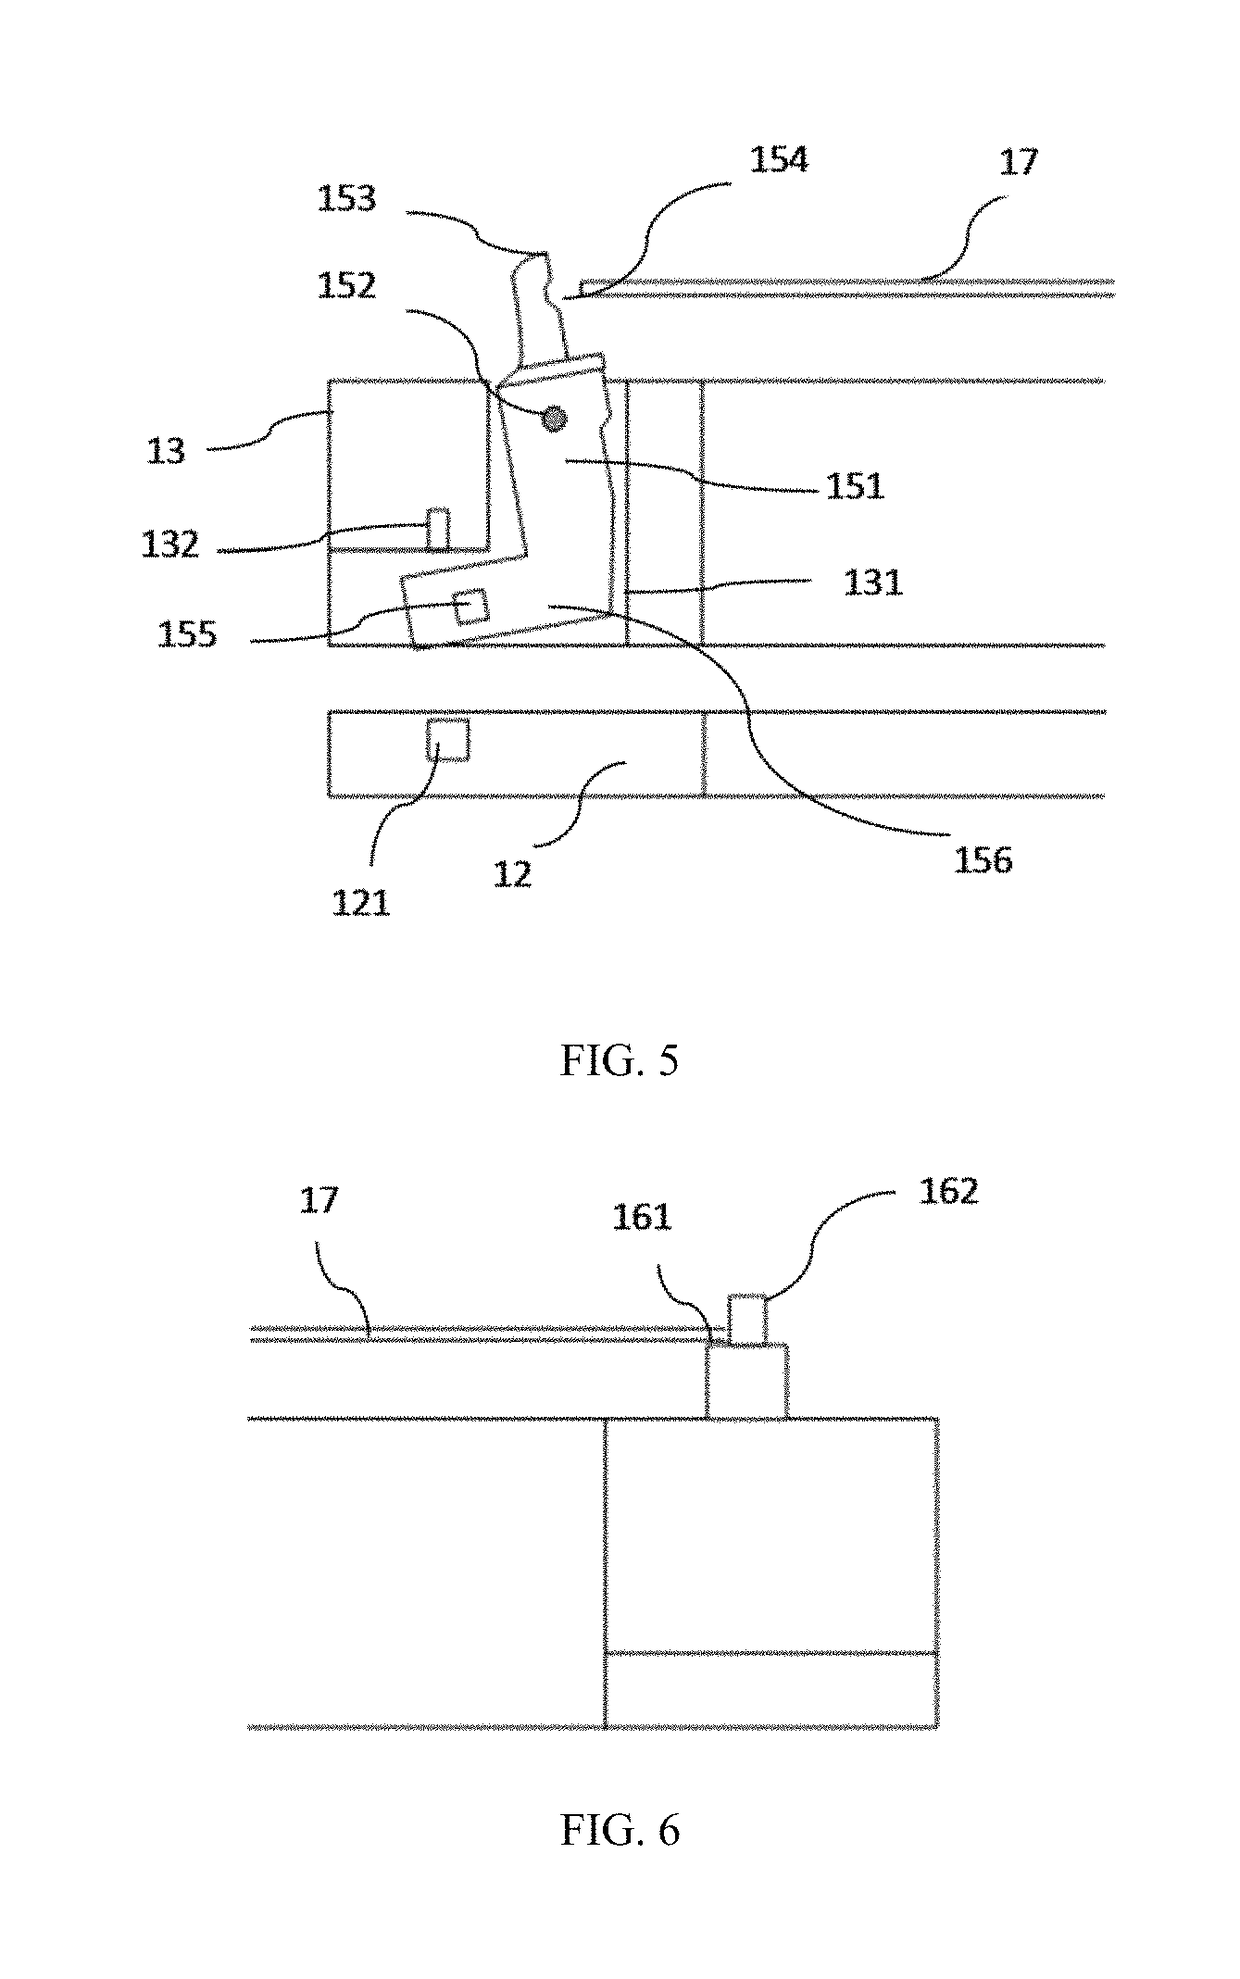 Device for holding and rotating plate shaped article